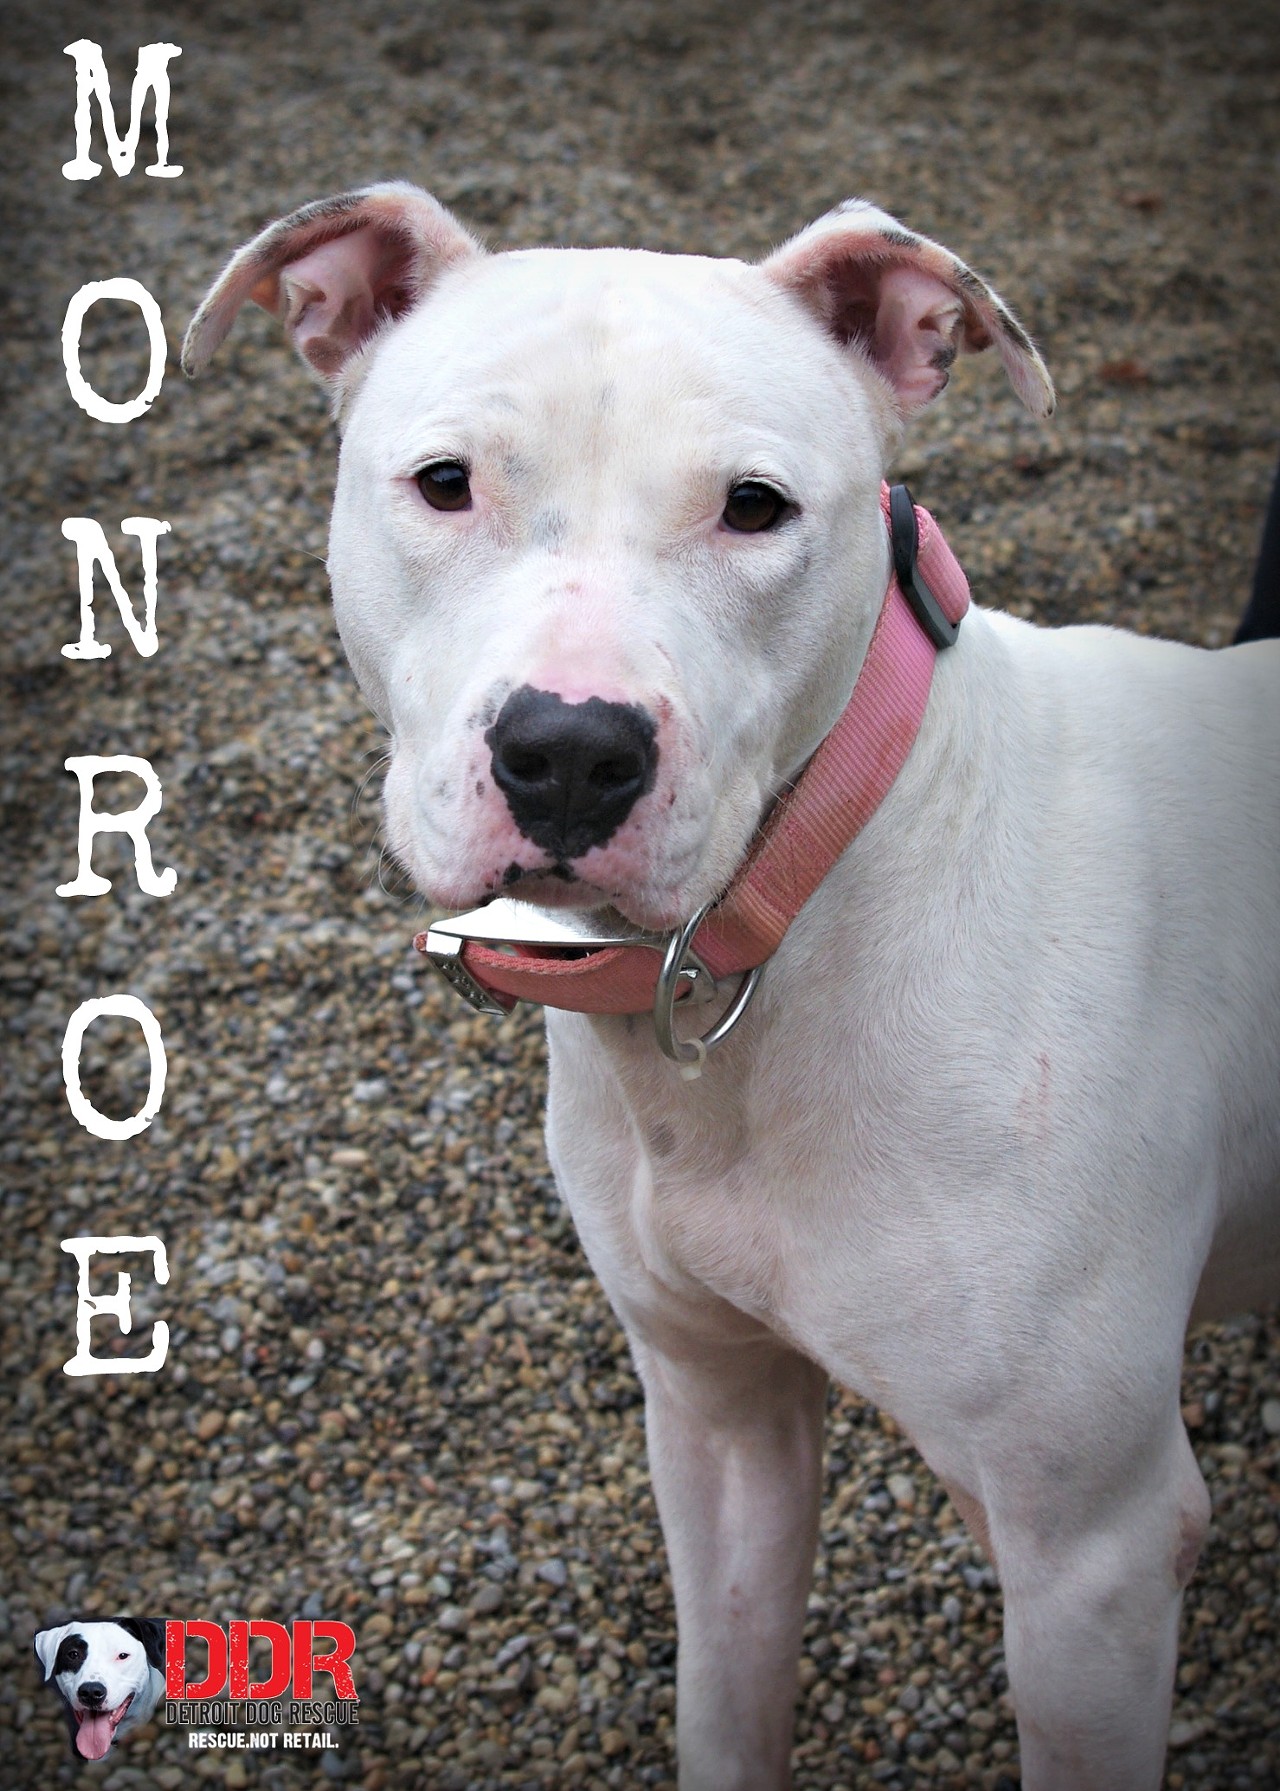 Monroe is a two-year-old Pit Bull mix who loves baths, belly rubs and the occasional ice cream cone. Monroe prefers to be the only dog in the home so she can steal all your attention and kisses.